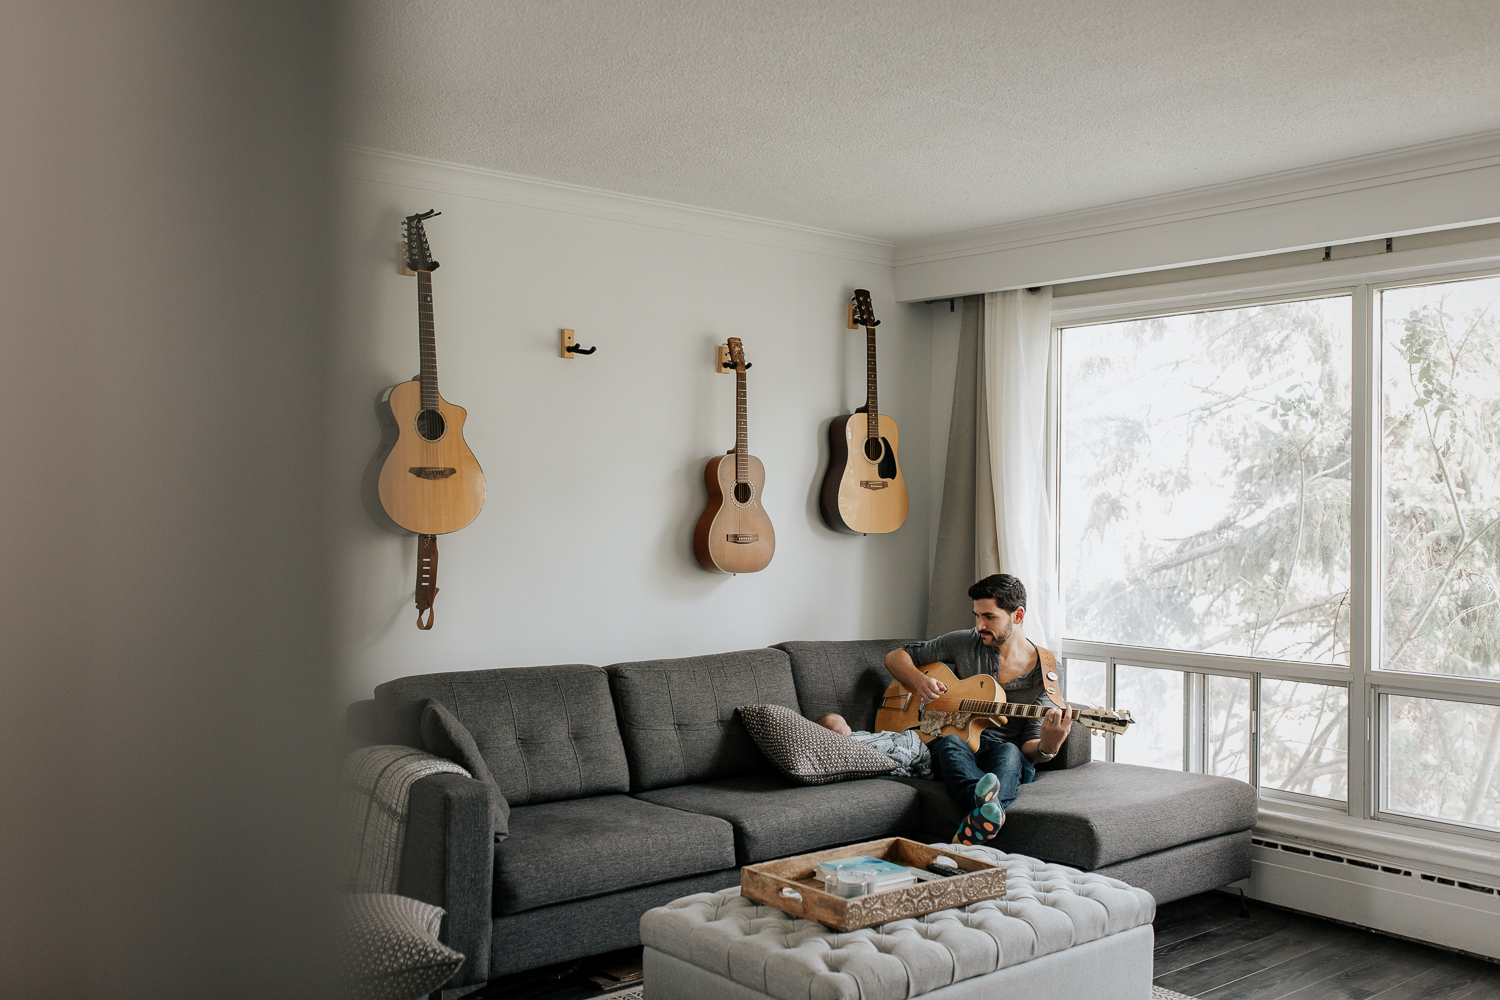 new dad sitting on living room couch playing guitar and singing to 2 week old baby boy lying against cushions - Newmarket In-Home Photography